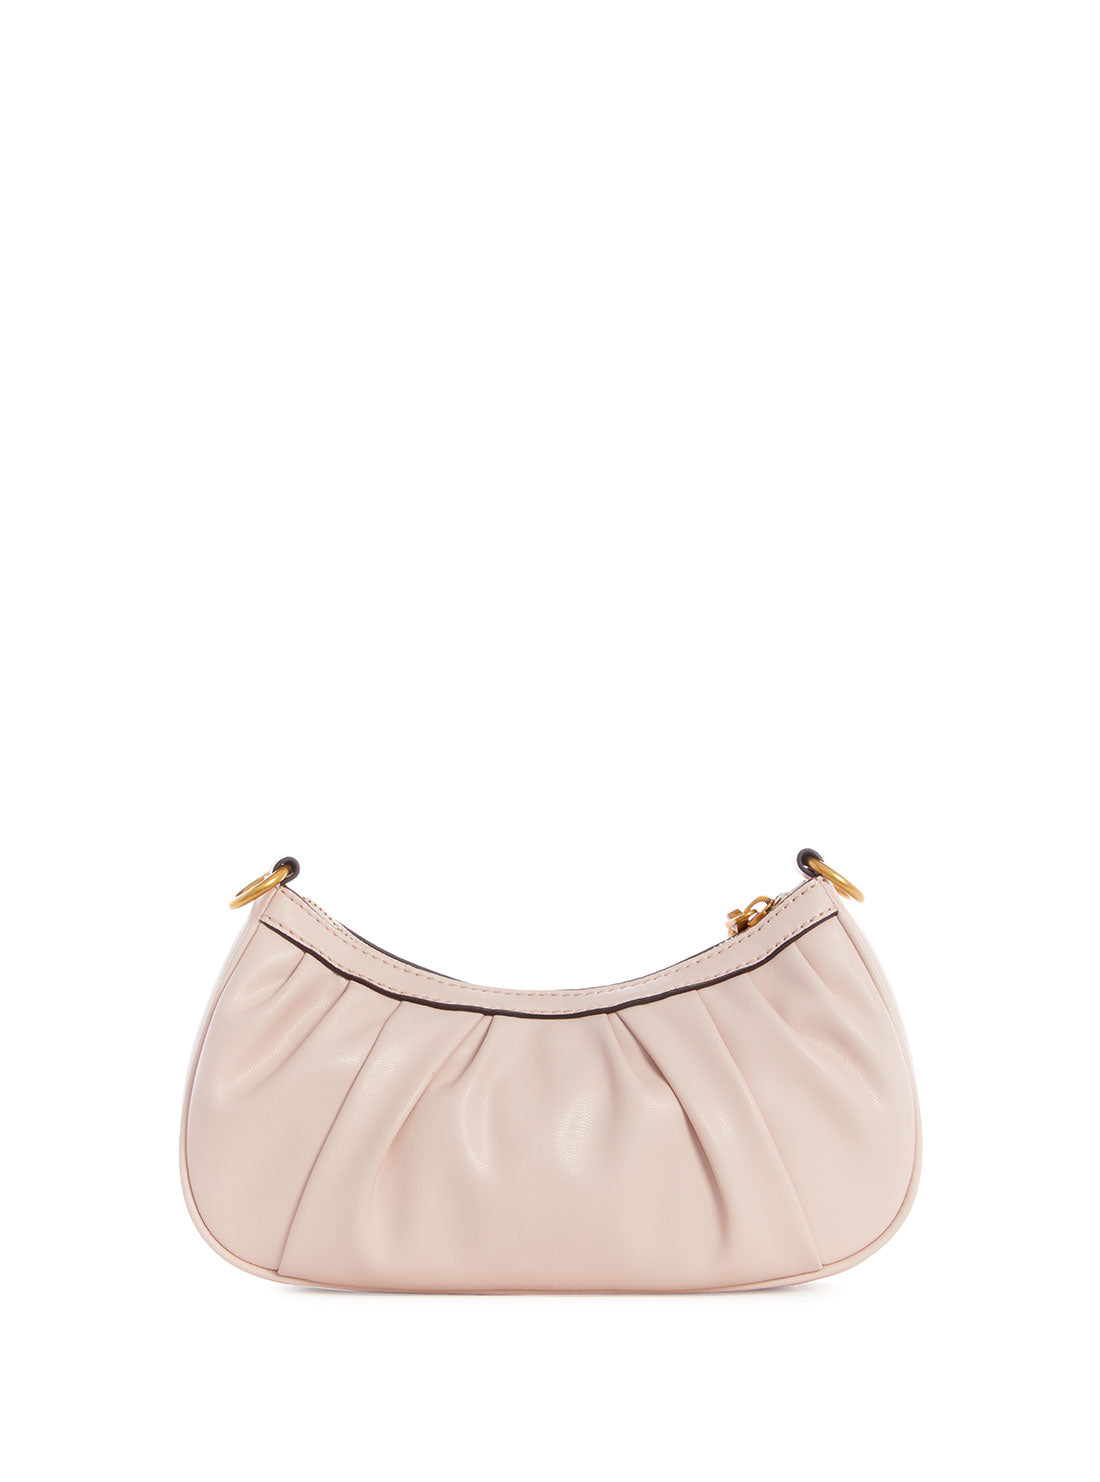 Shell Mariana Pouch Shoulder Bag